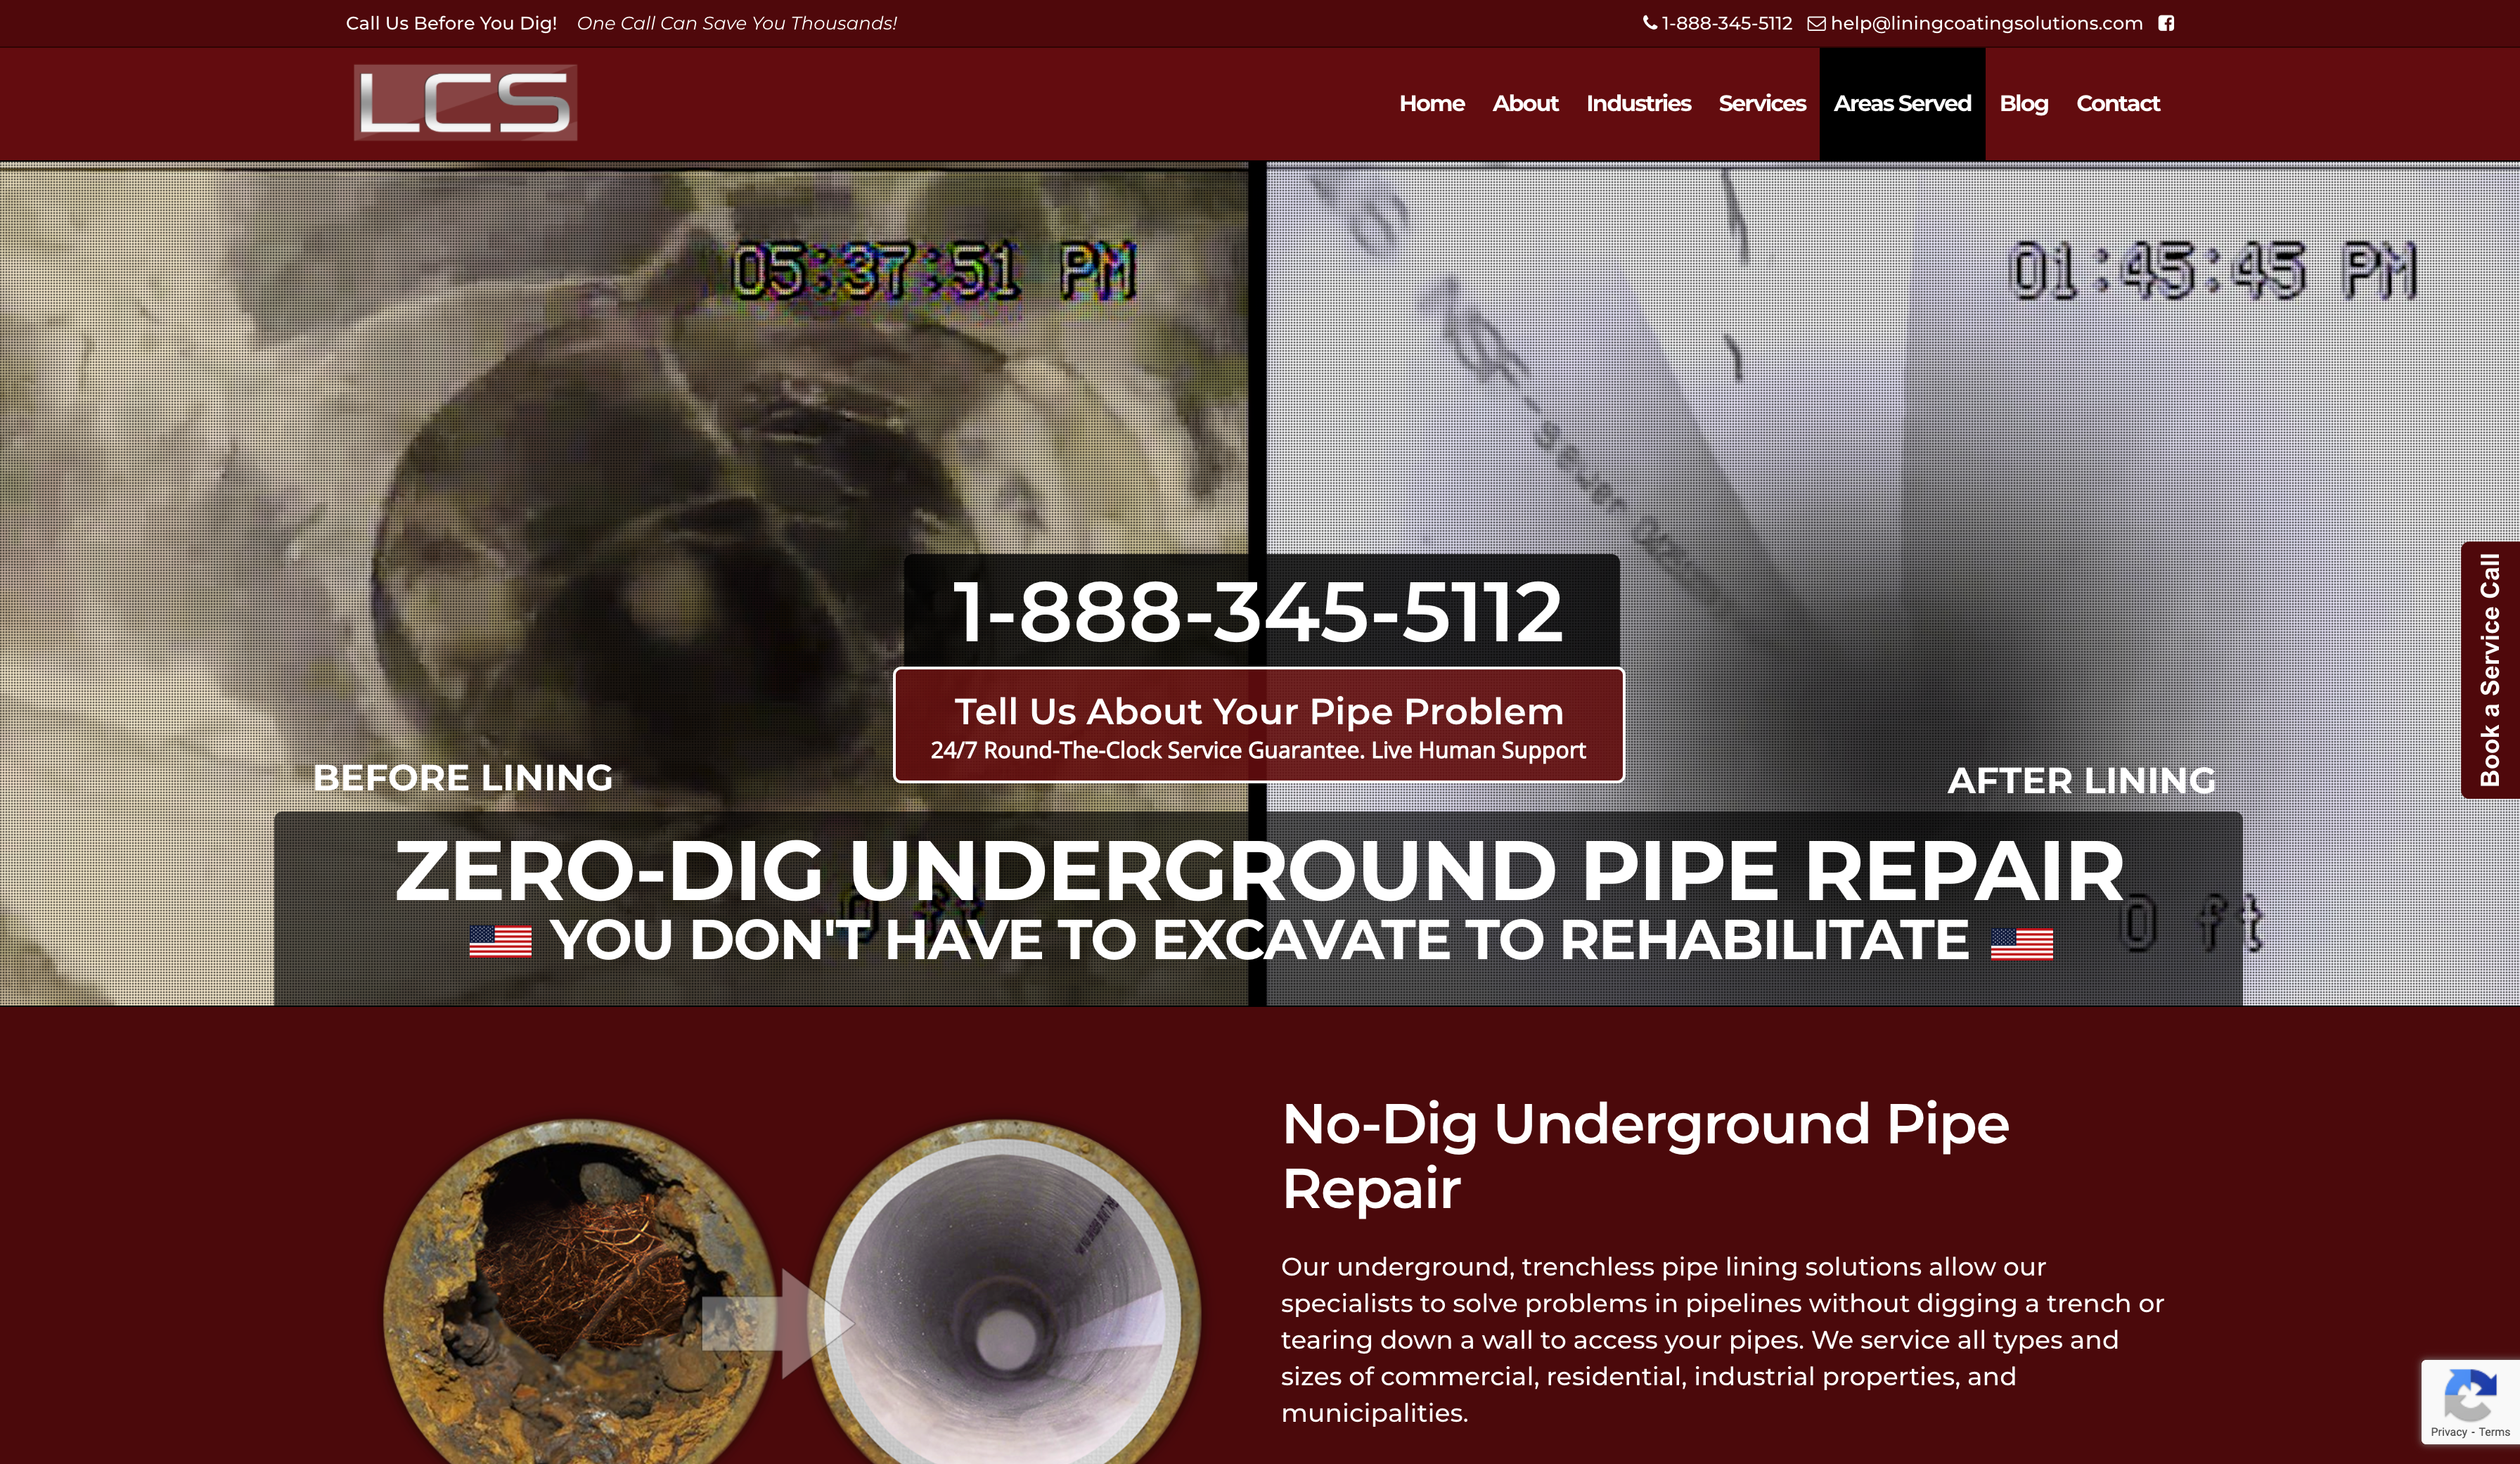 Trenchless-Pipelining-Lining-Coating-Solutions-Sewer-Repair-Tampa